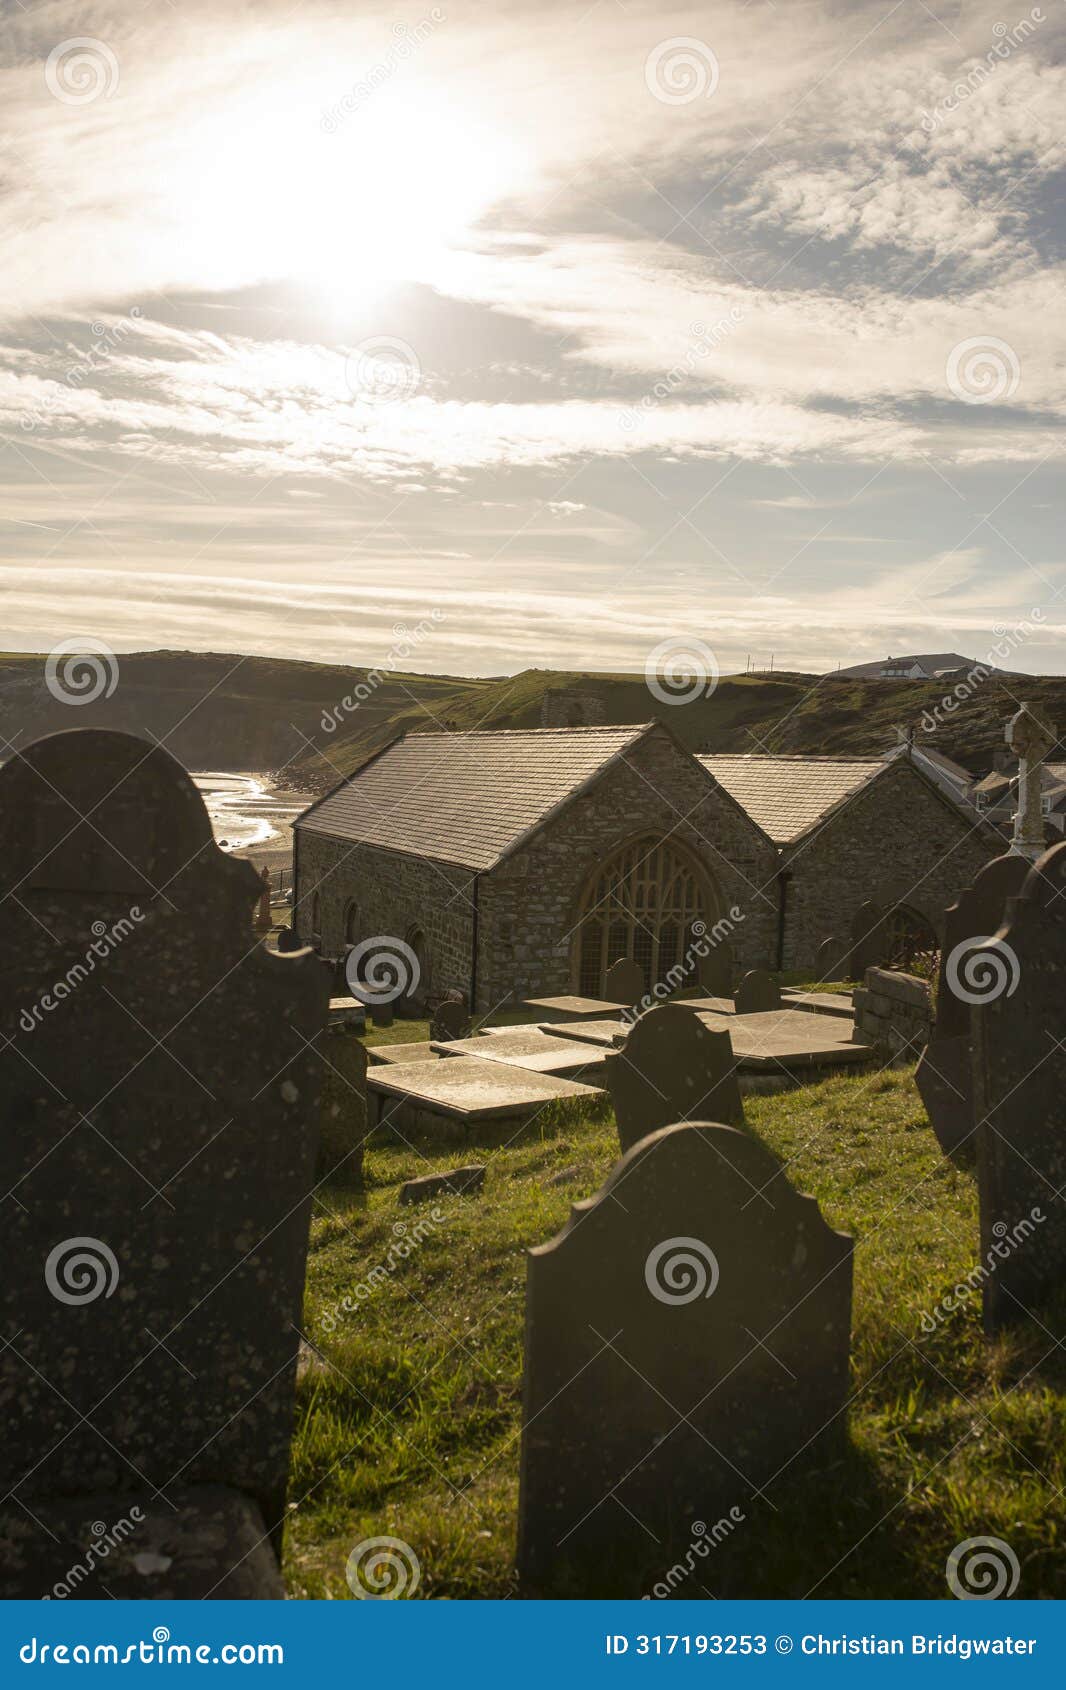 st. hywyn's church, aberdaron, wales in evening sunlight. an important place of pilgrimage